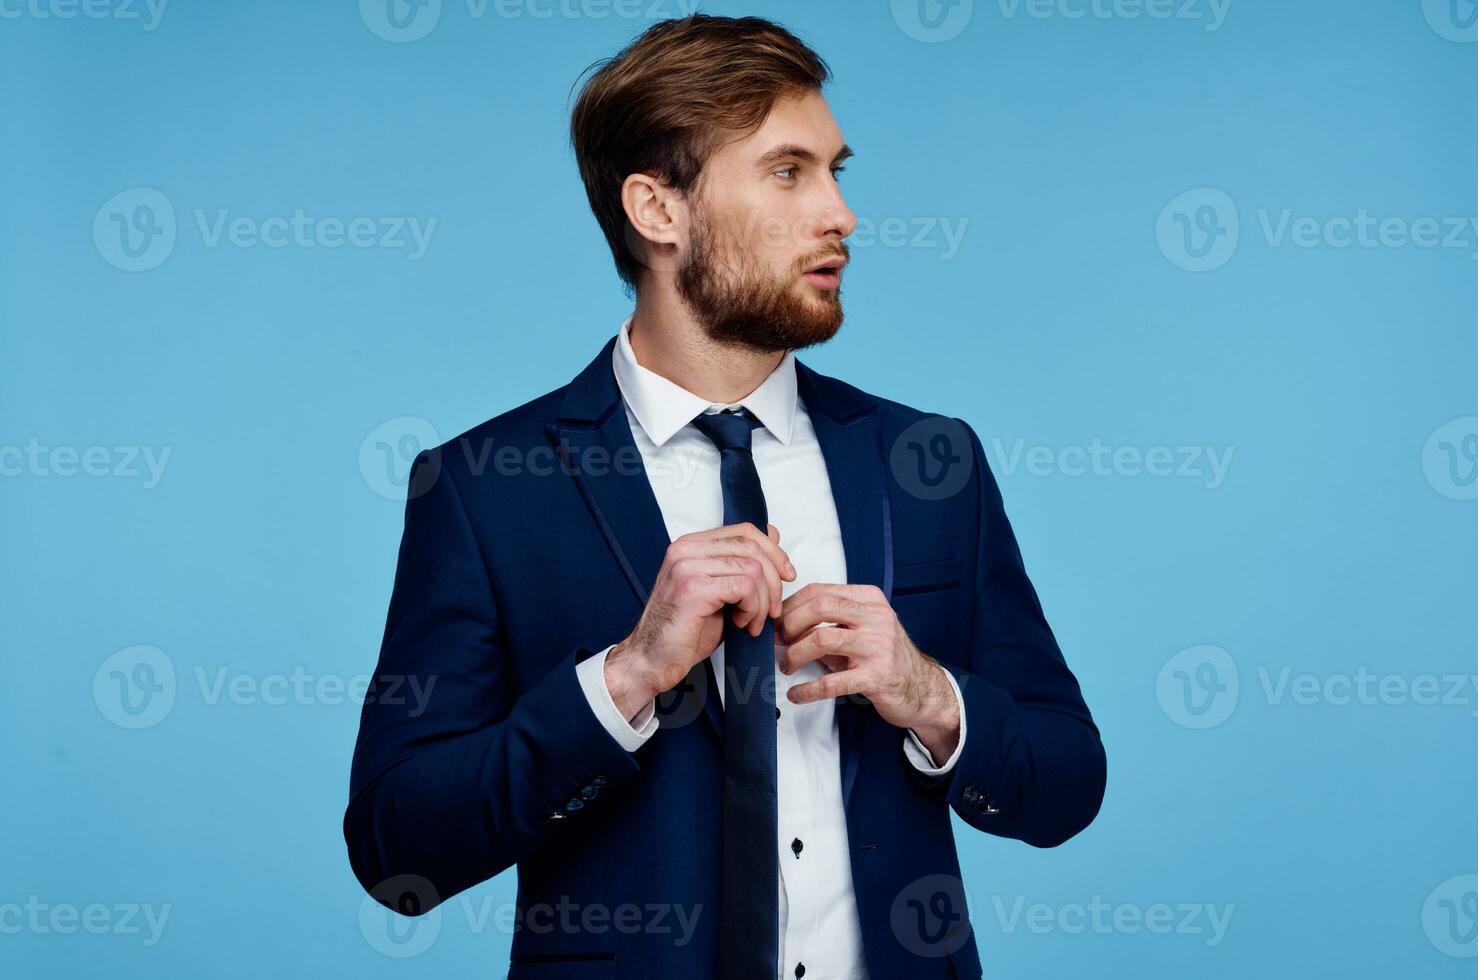 man in a suit straightens his tie self confidence fashion businessman photo